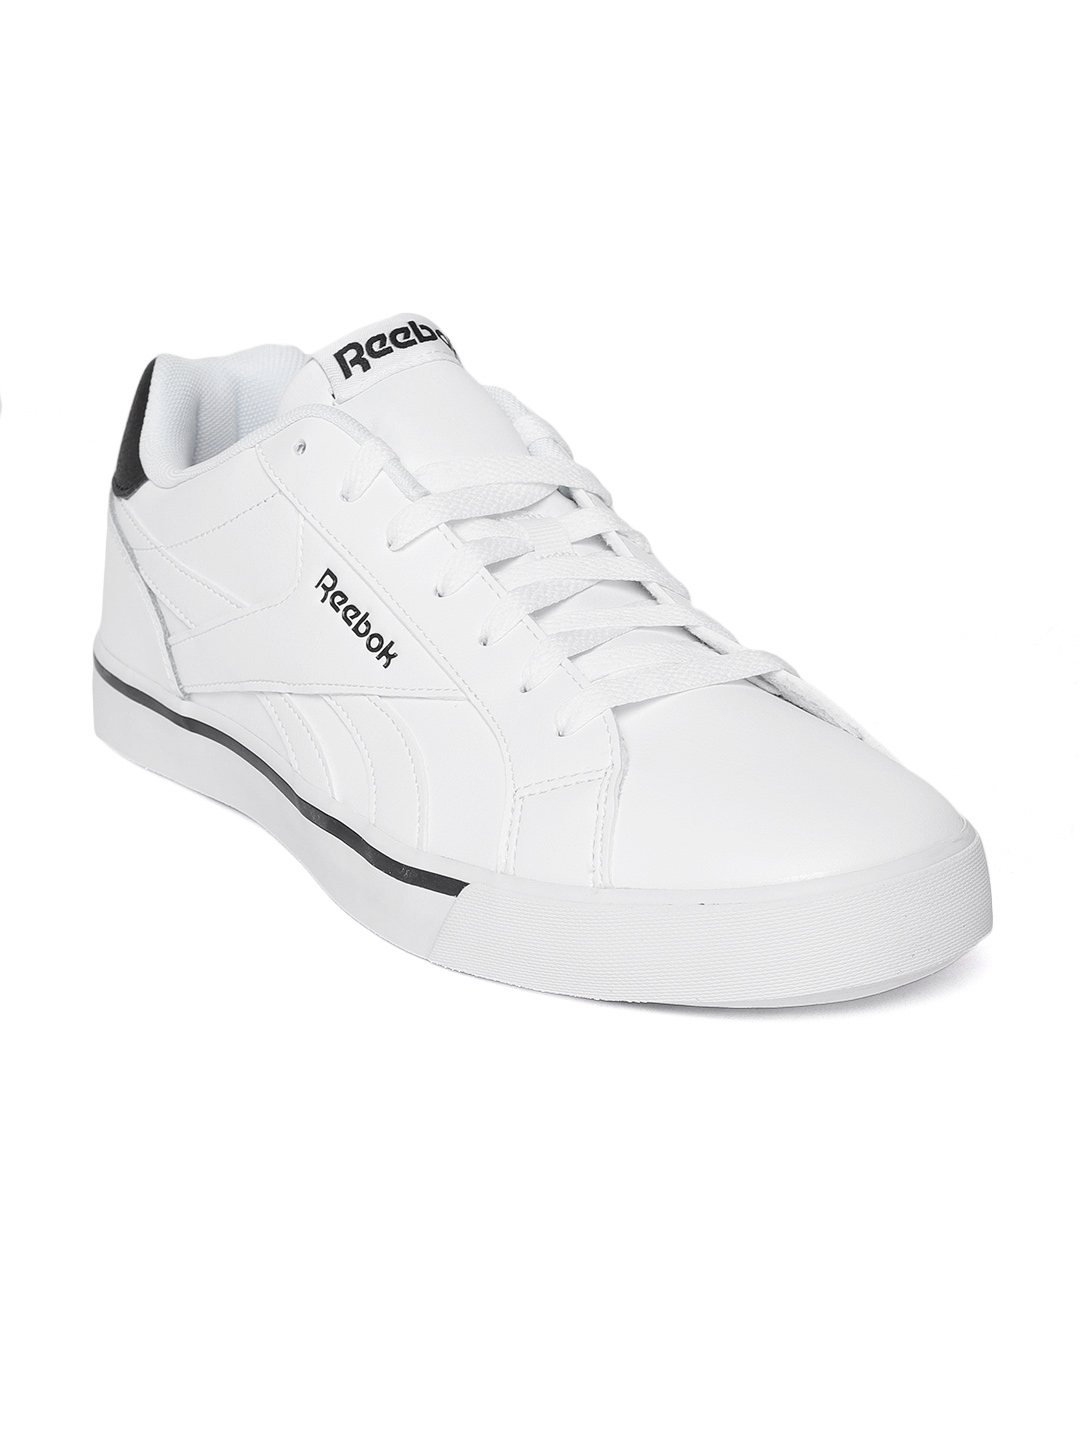 Discover 168+ reebok white sneakers mens latest